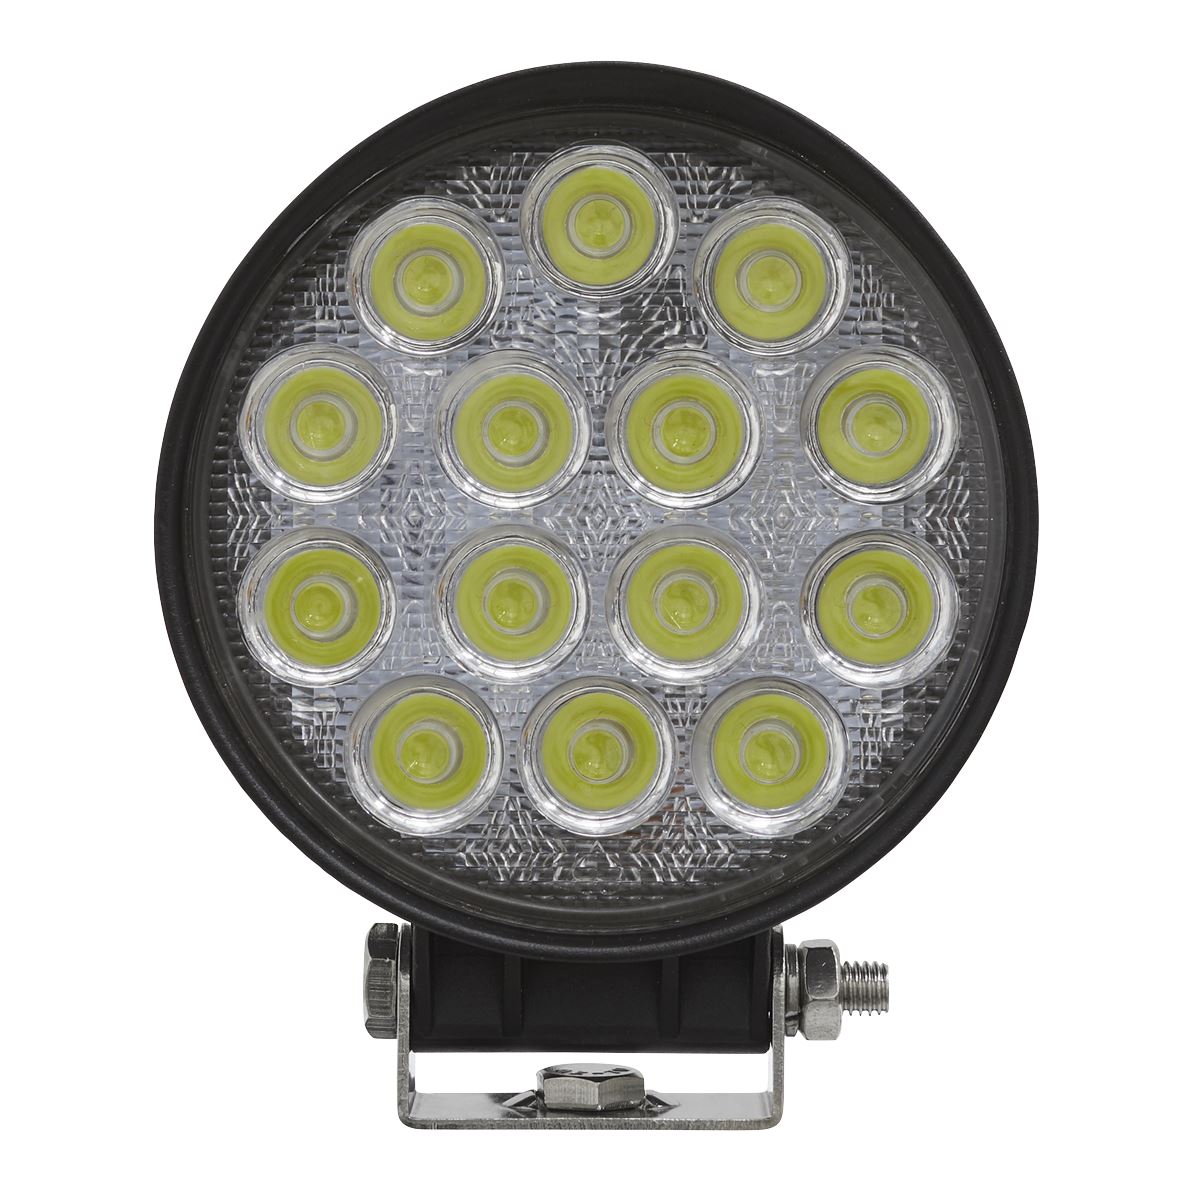 Sealey Round Worklight with Mounting Bracket 42W SMD LED